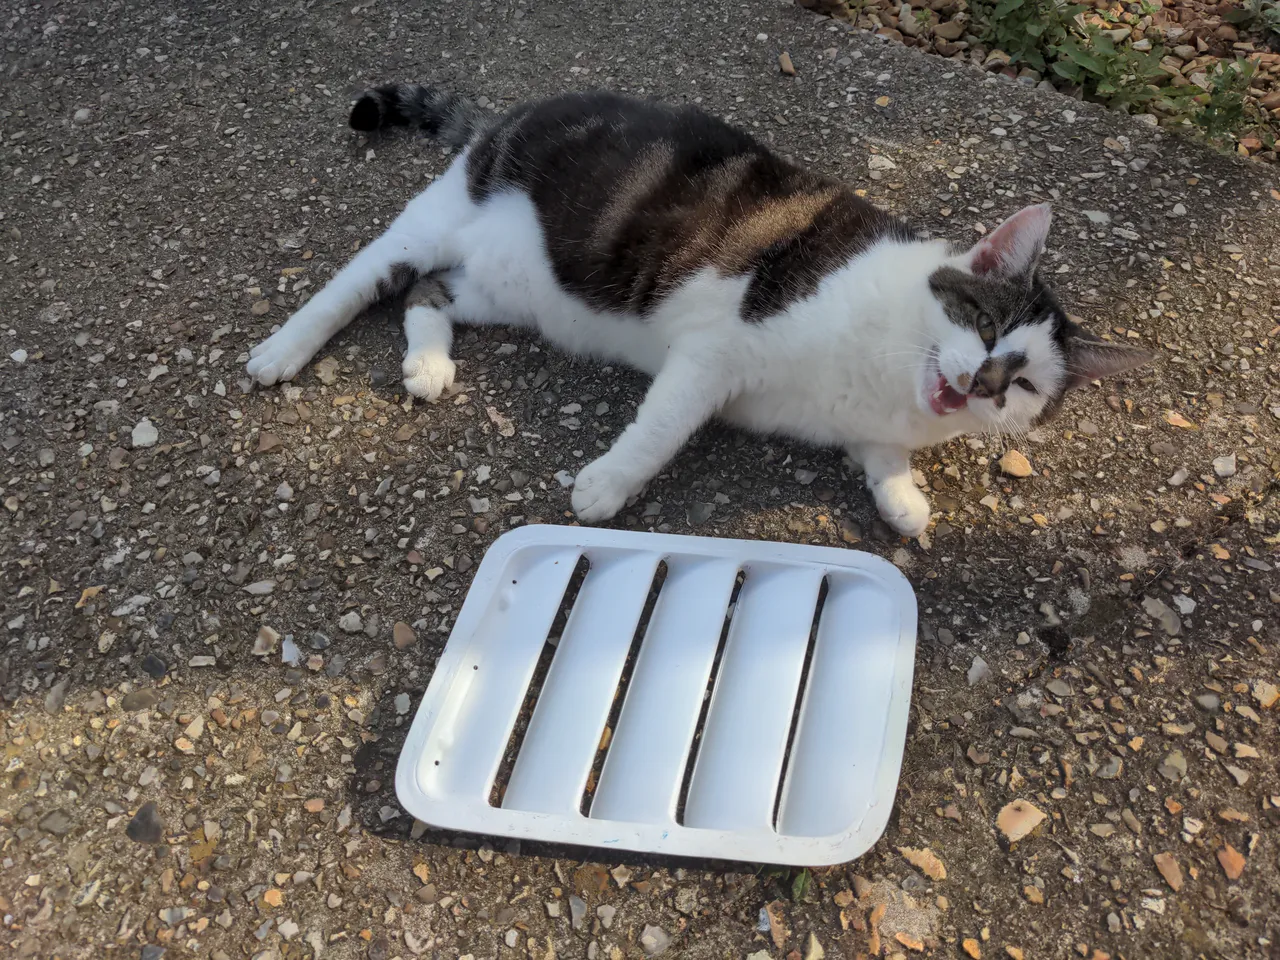 My cat next to one of the RS500 vents. She is a chubby cat and the vents are not much smaller than her.